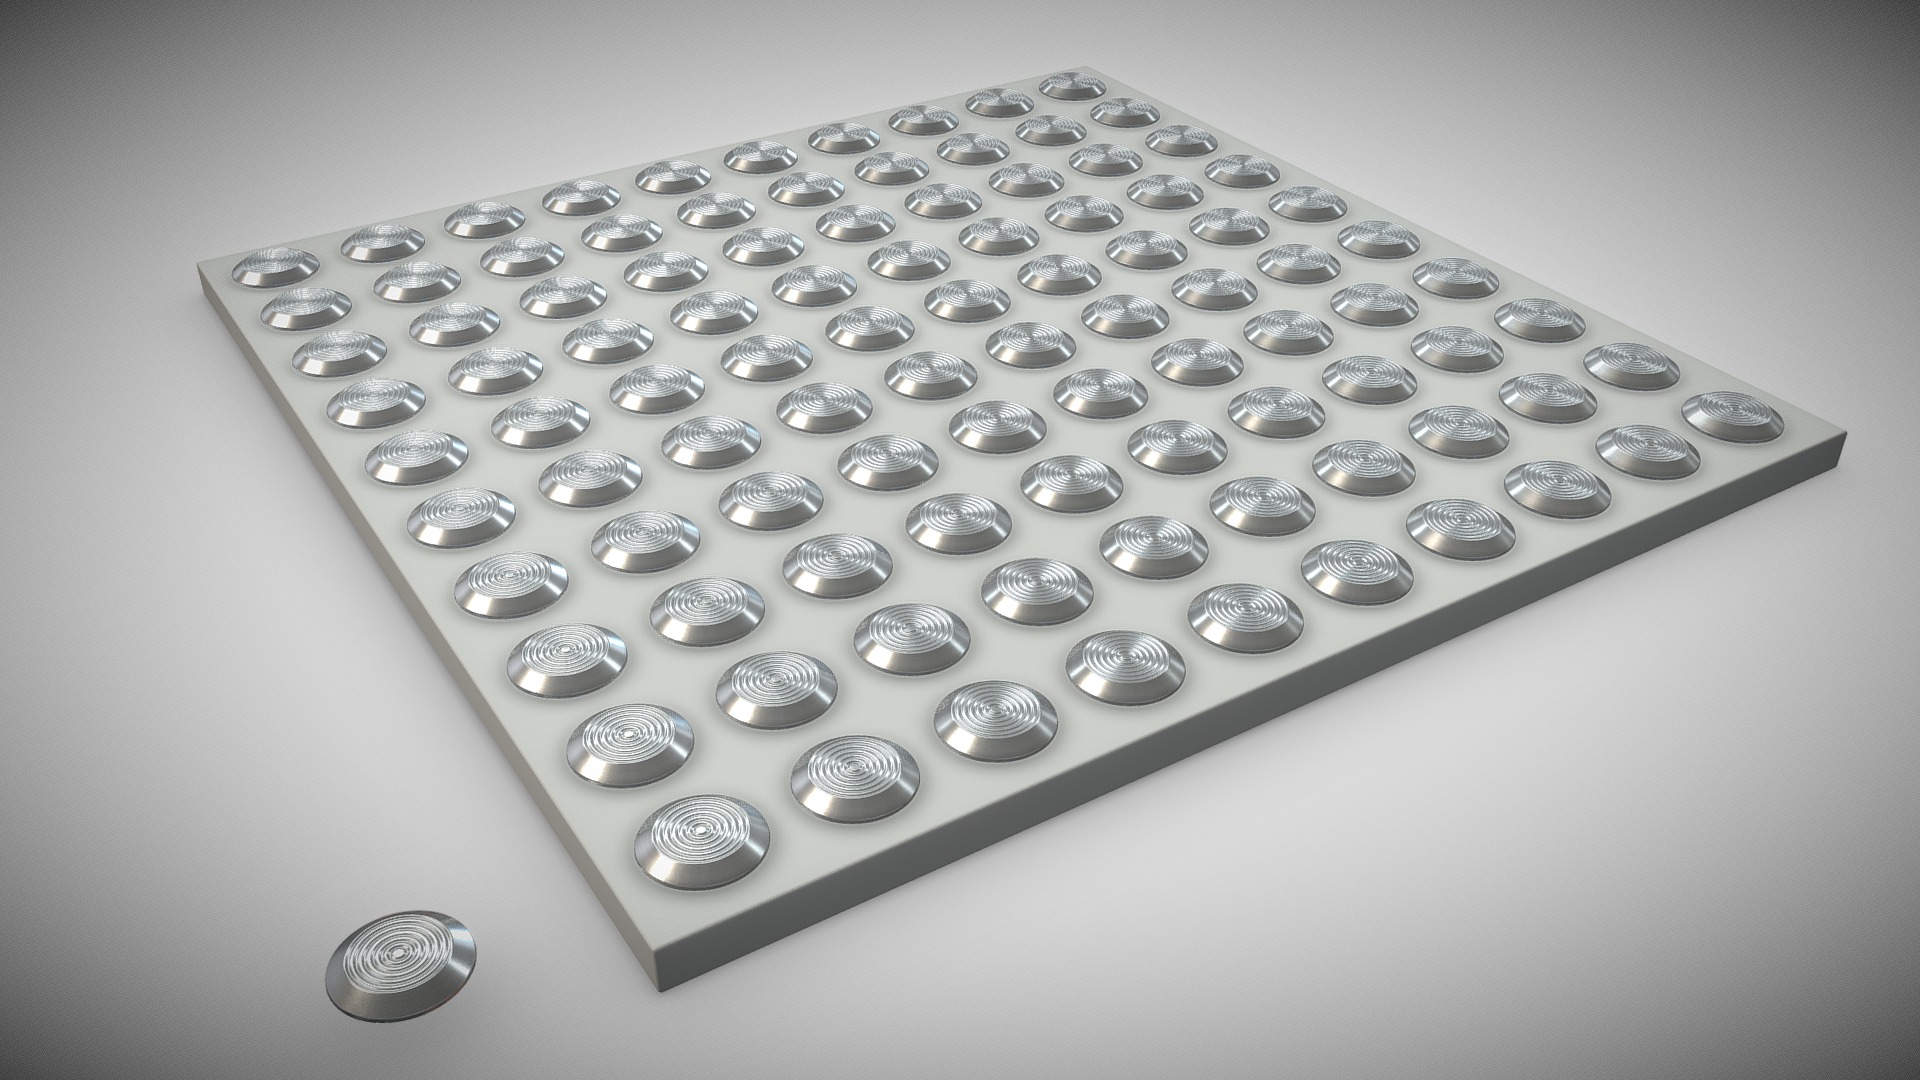 3D model Tactile Studs – Stainless Steel (High-Poly) - This is a 3D model of the Tactile Studs - Stainless Steel (High-Poly). The 3D model is about a close-up of a calculator.